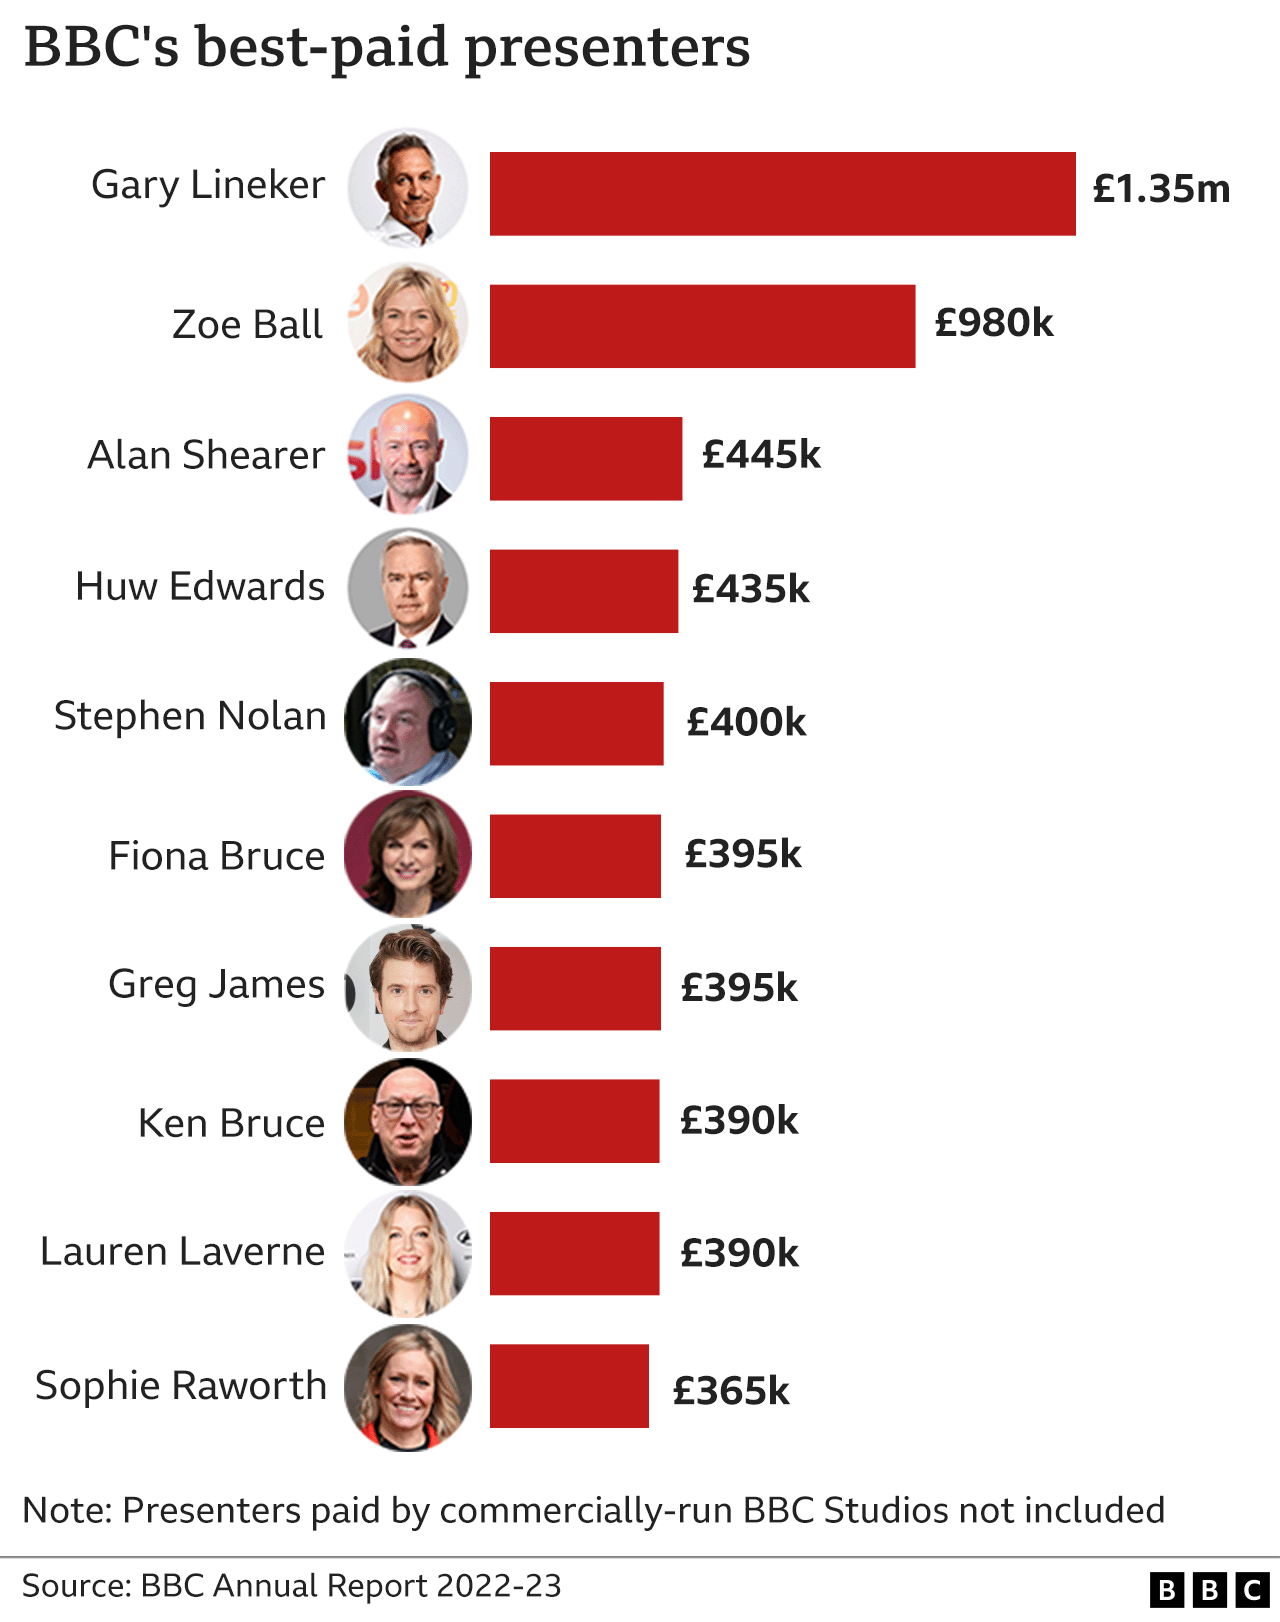 Graphic showing the 10 best-paid BBC presenters in 2022-23 according to the BBC's Annual Report (which does not include those paid by the commercially run BBC Studios). They were Gary Lineker on 1.35m, Zoe Ball £980k, Alan Shearer £445k, Huw Edwards £435k, Stephen Nolan £400k, Fiona Bruce £395k, Greg James £395k, Ken Bruce £390k, Lauren Laverne £390k, and Sophie Raworth £365k